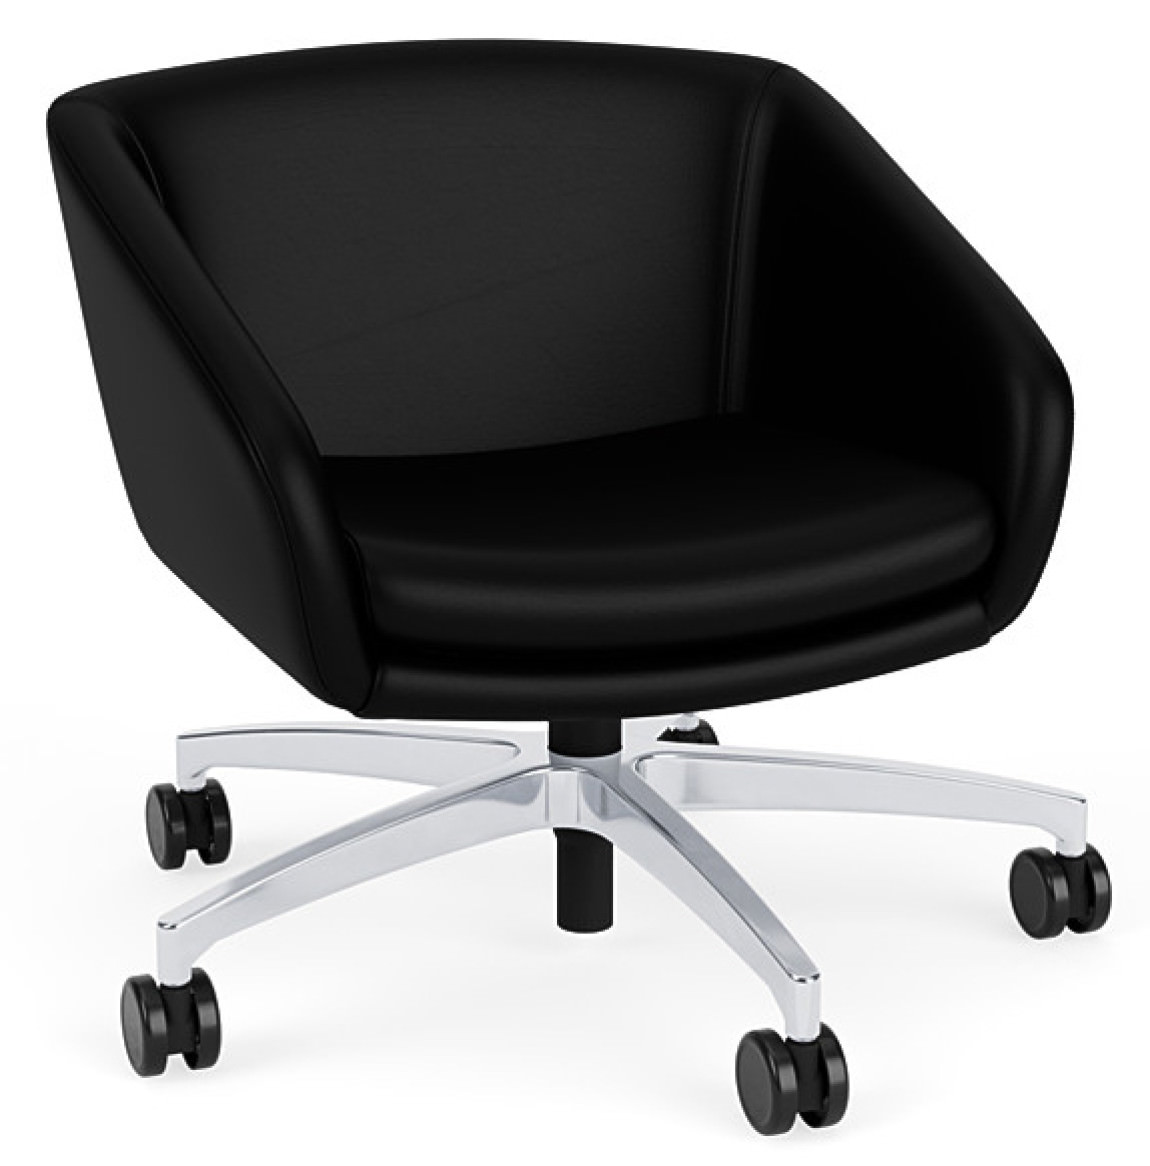 Swivel Conference Room Chair